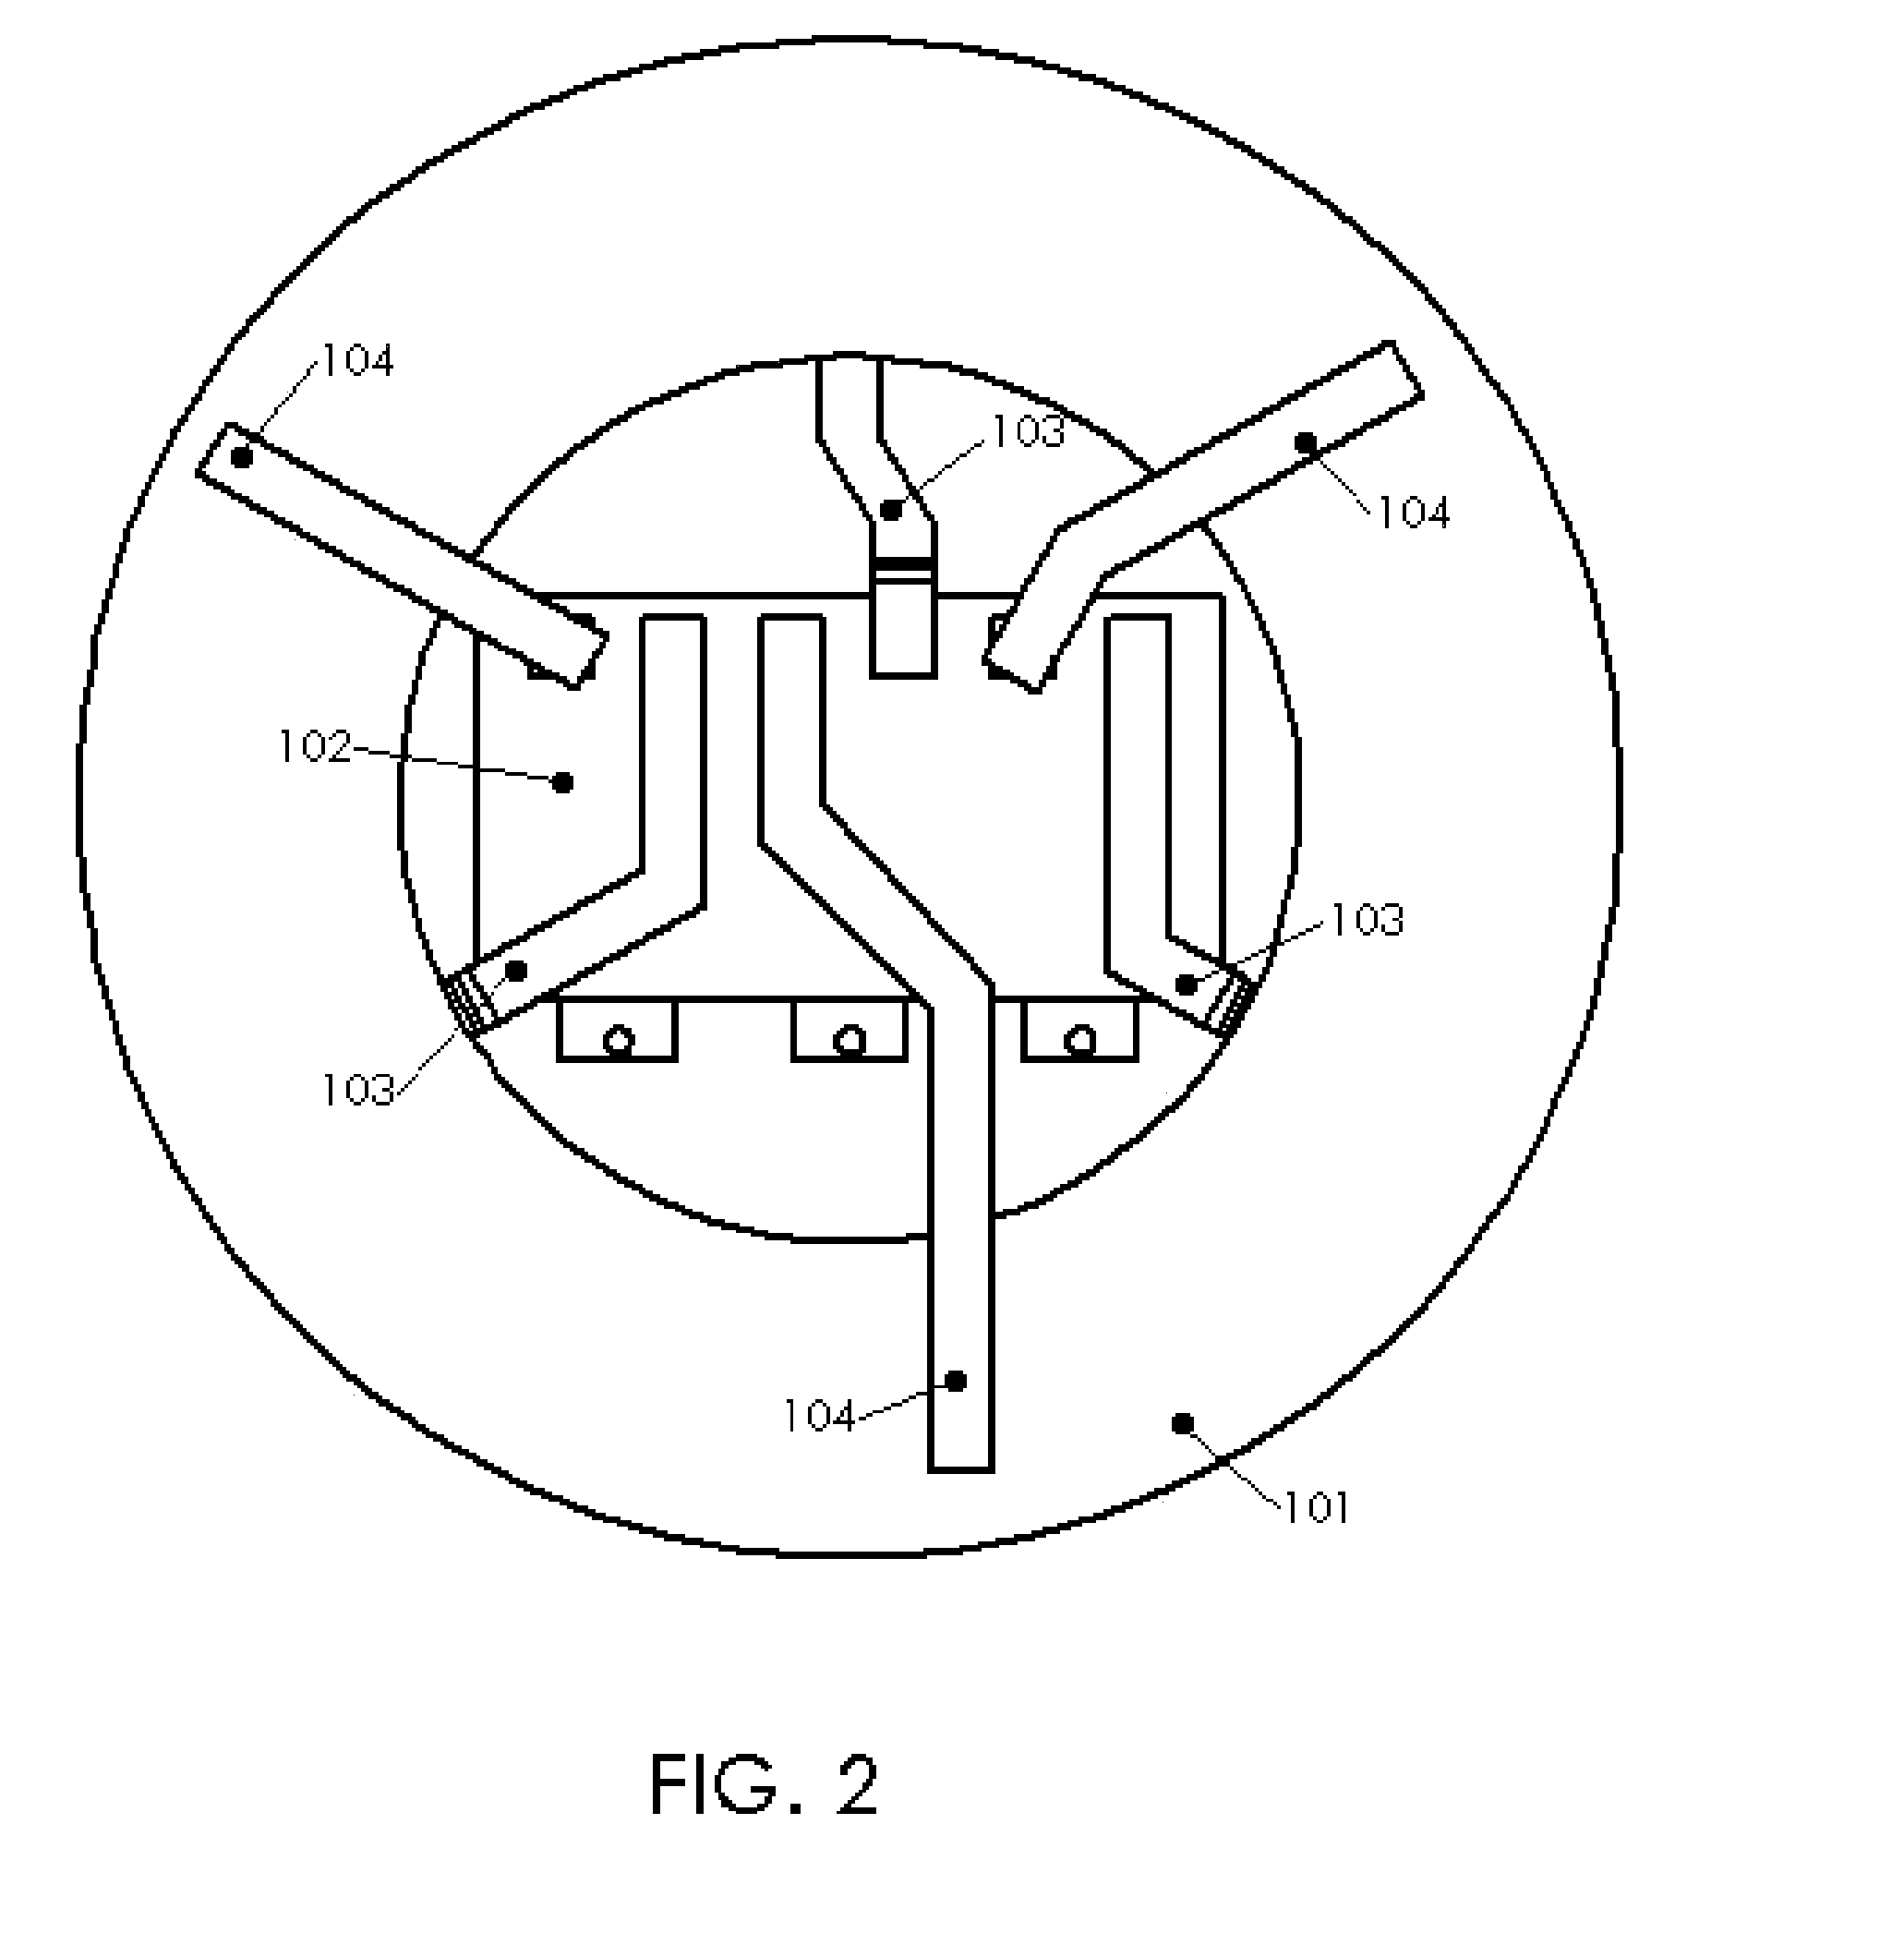 Annular Capacitor with power conversion components arranged and attached in manners uniquely allowed by the ring shaped form factor